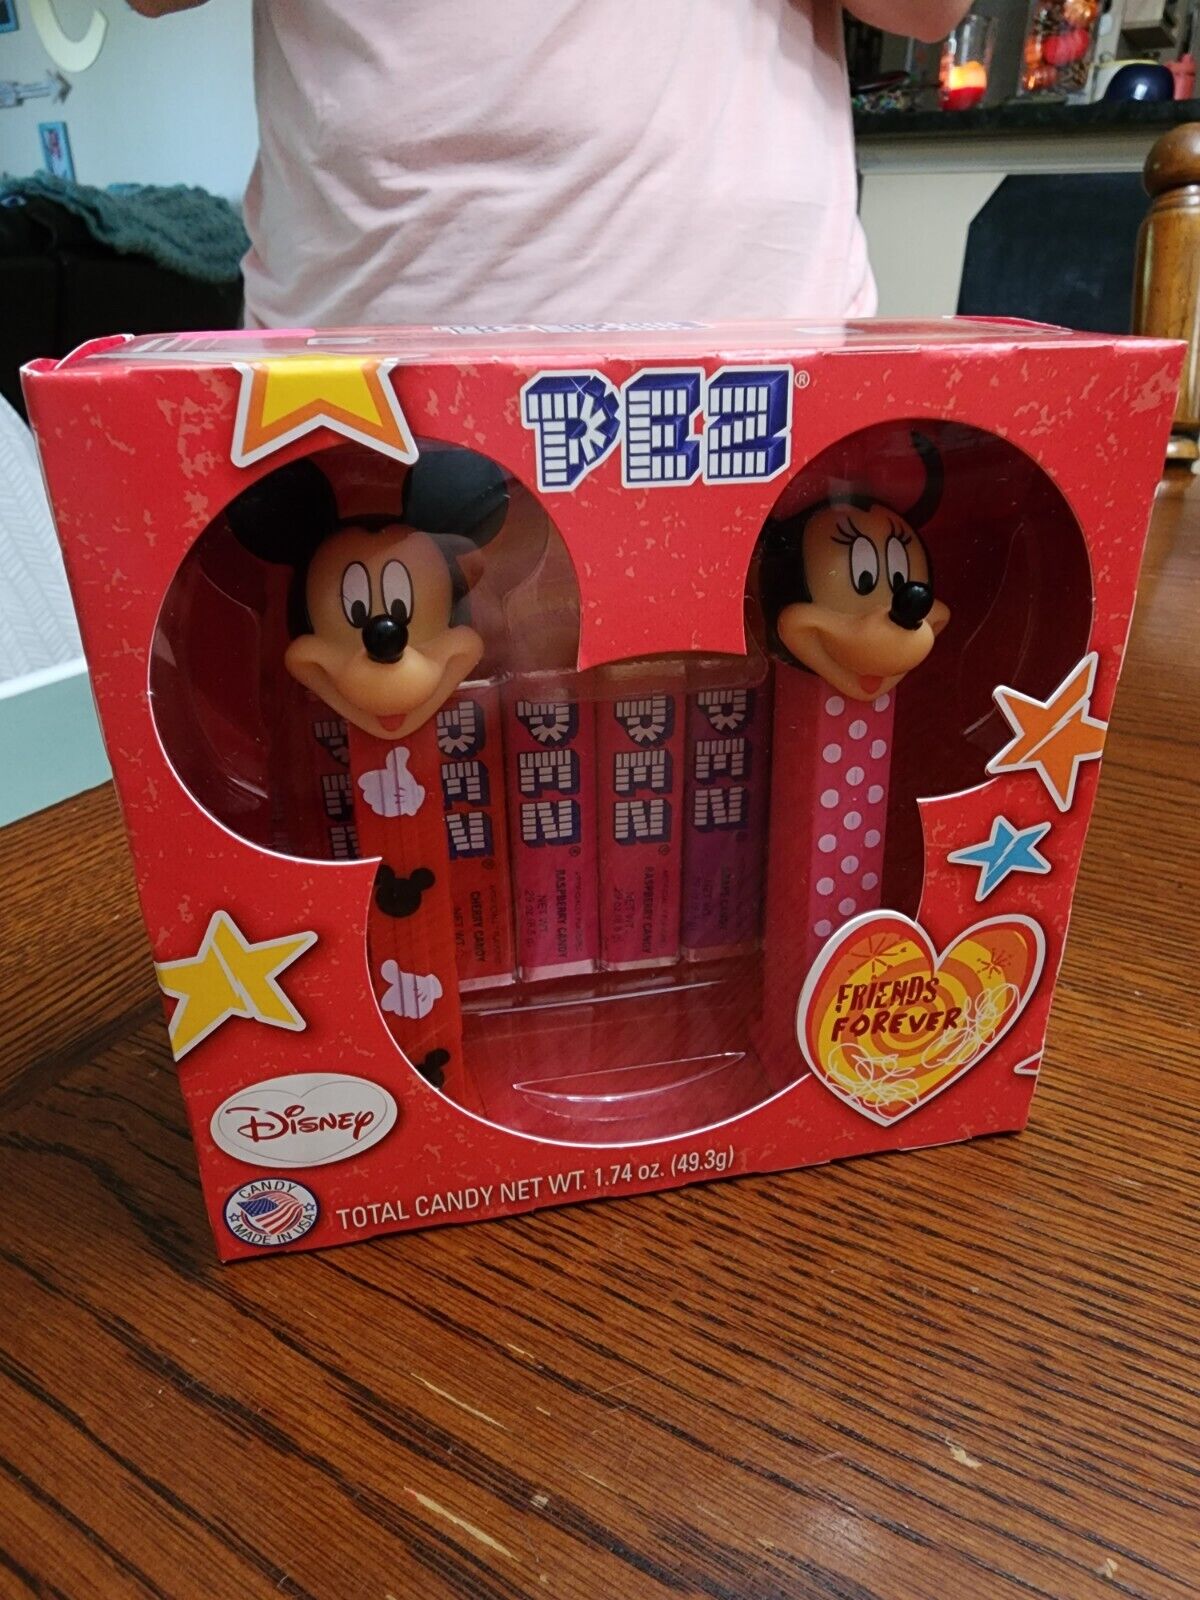 Pez Friends Forever Mickey & Minnie Disney Gift Set (2014) New In Box